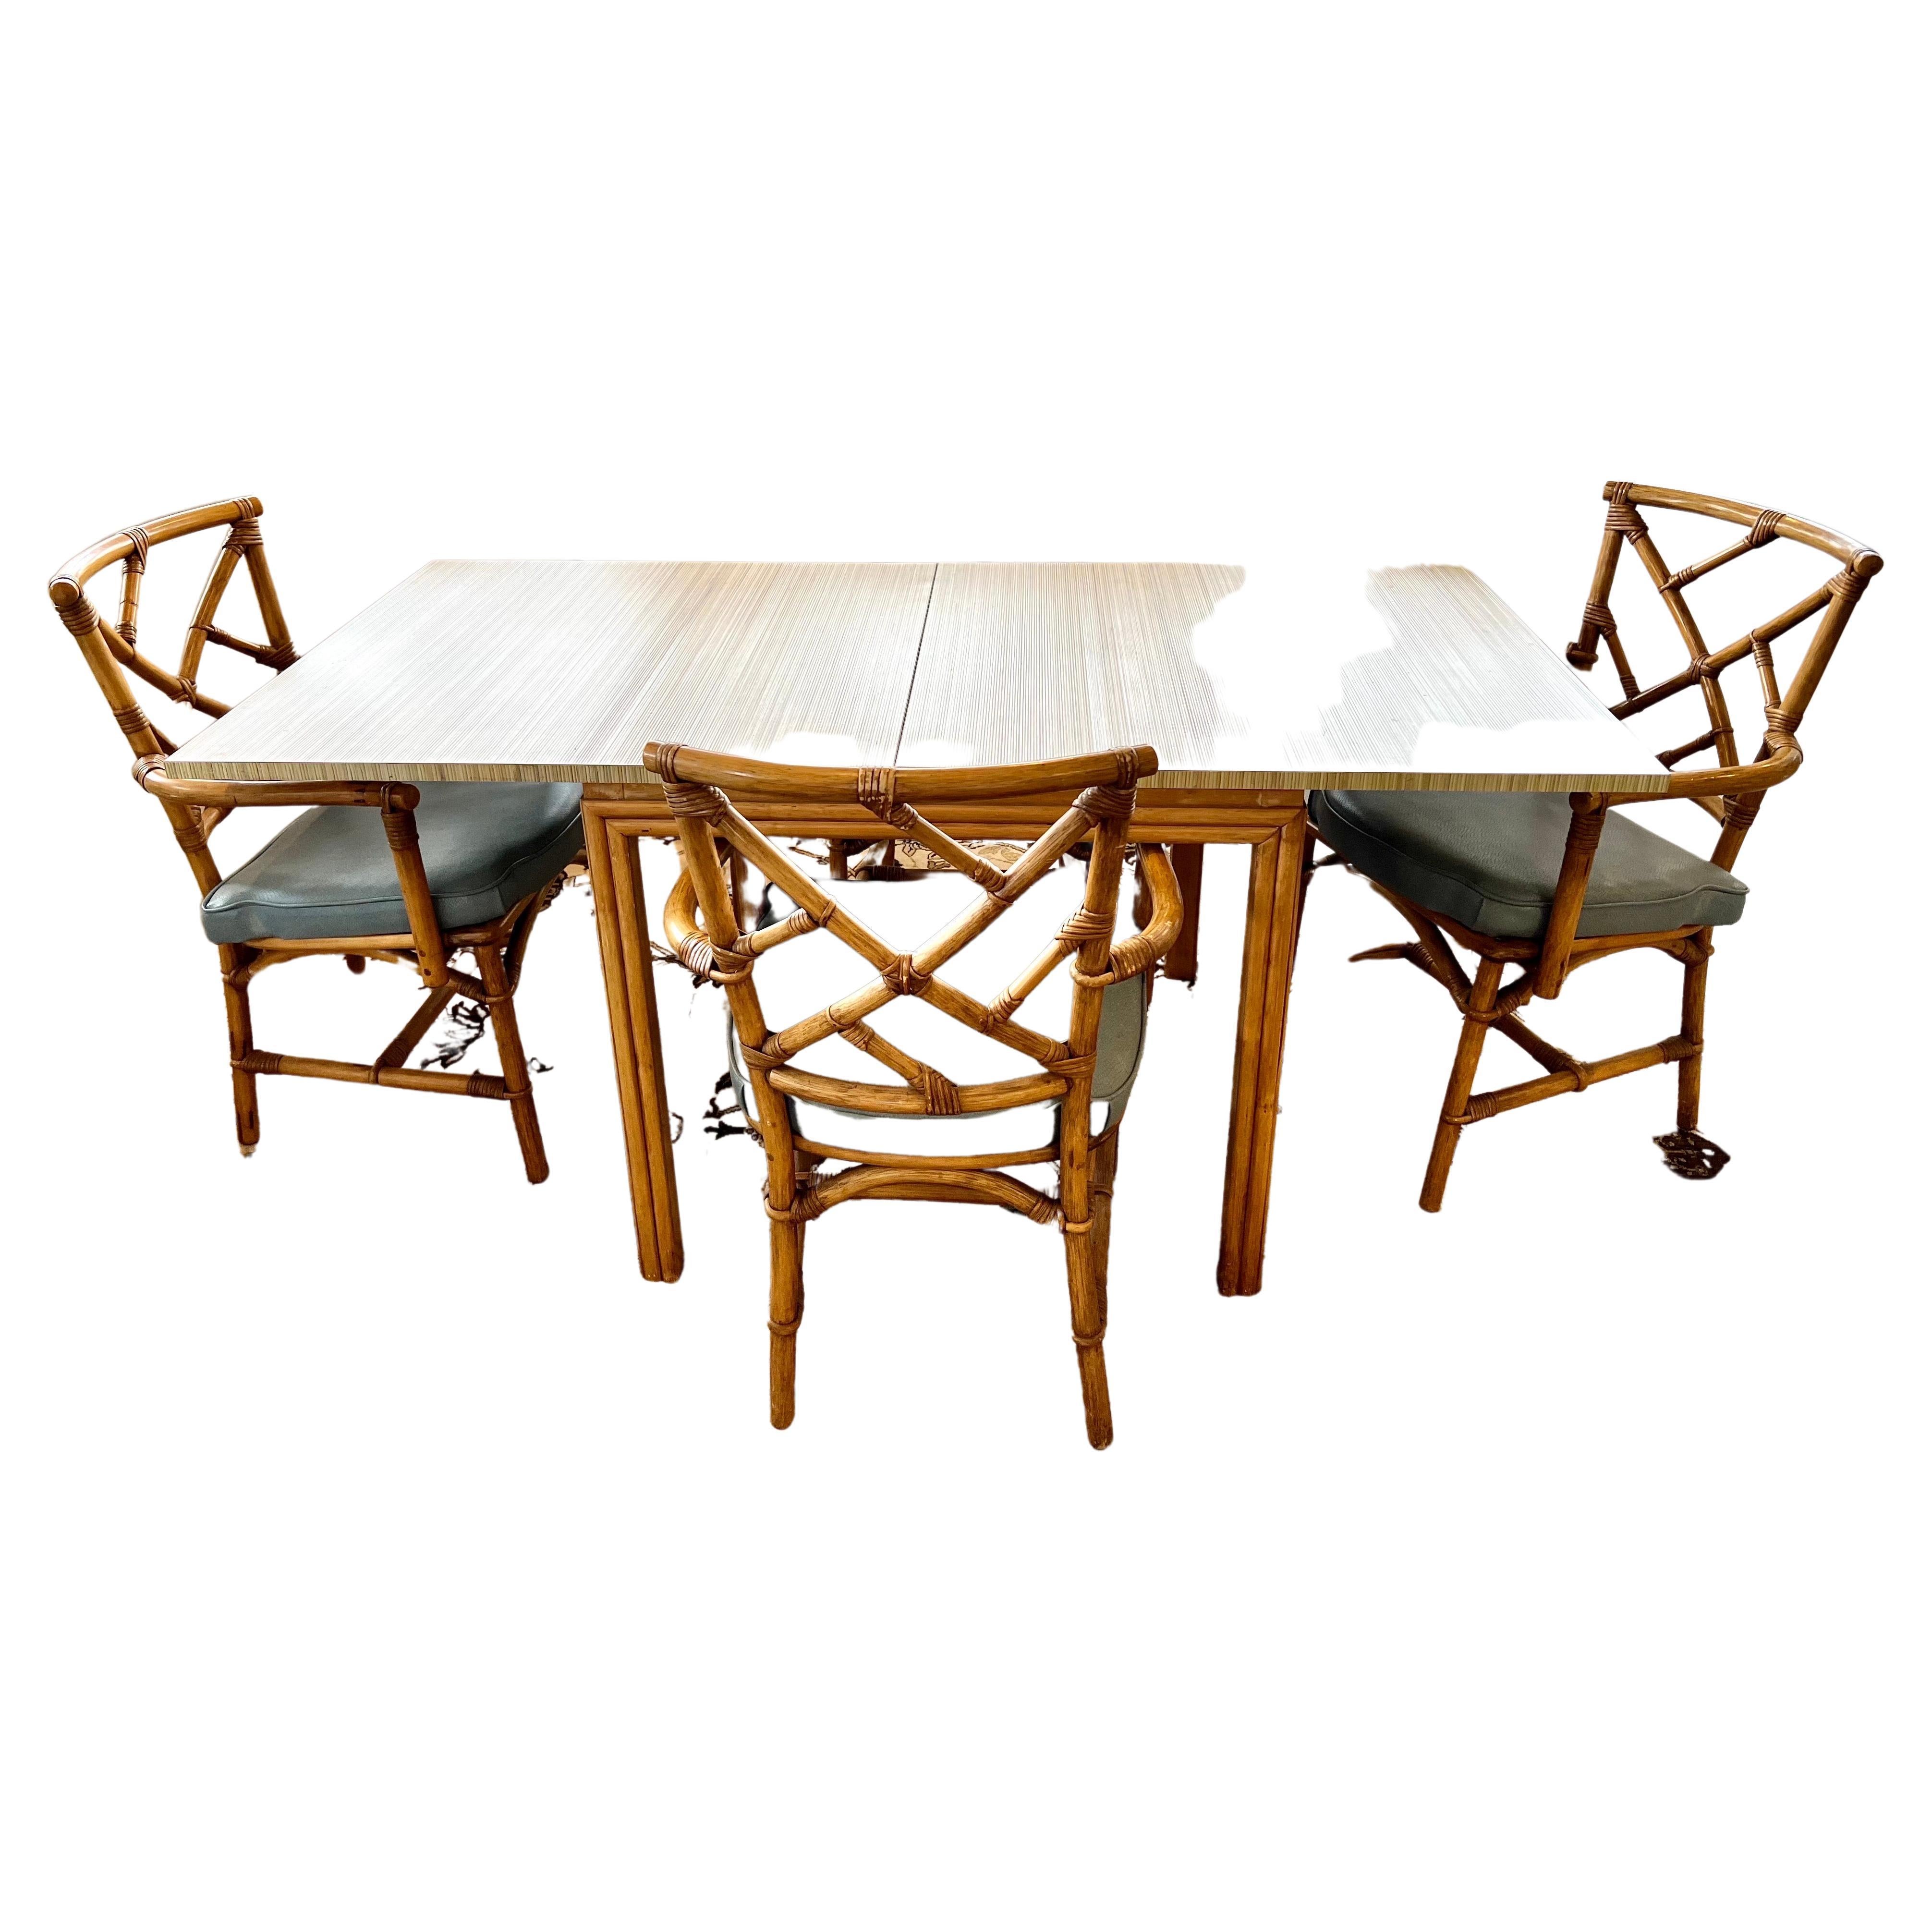 Rare bamboo expandable game table that doubles in size to a dining room table and four matching chairs - all original, circa 1970's. The dimensions above show the table open (width of 64